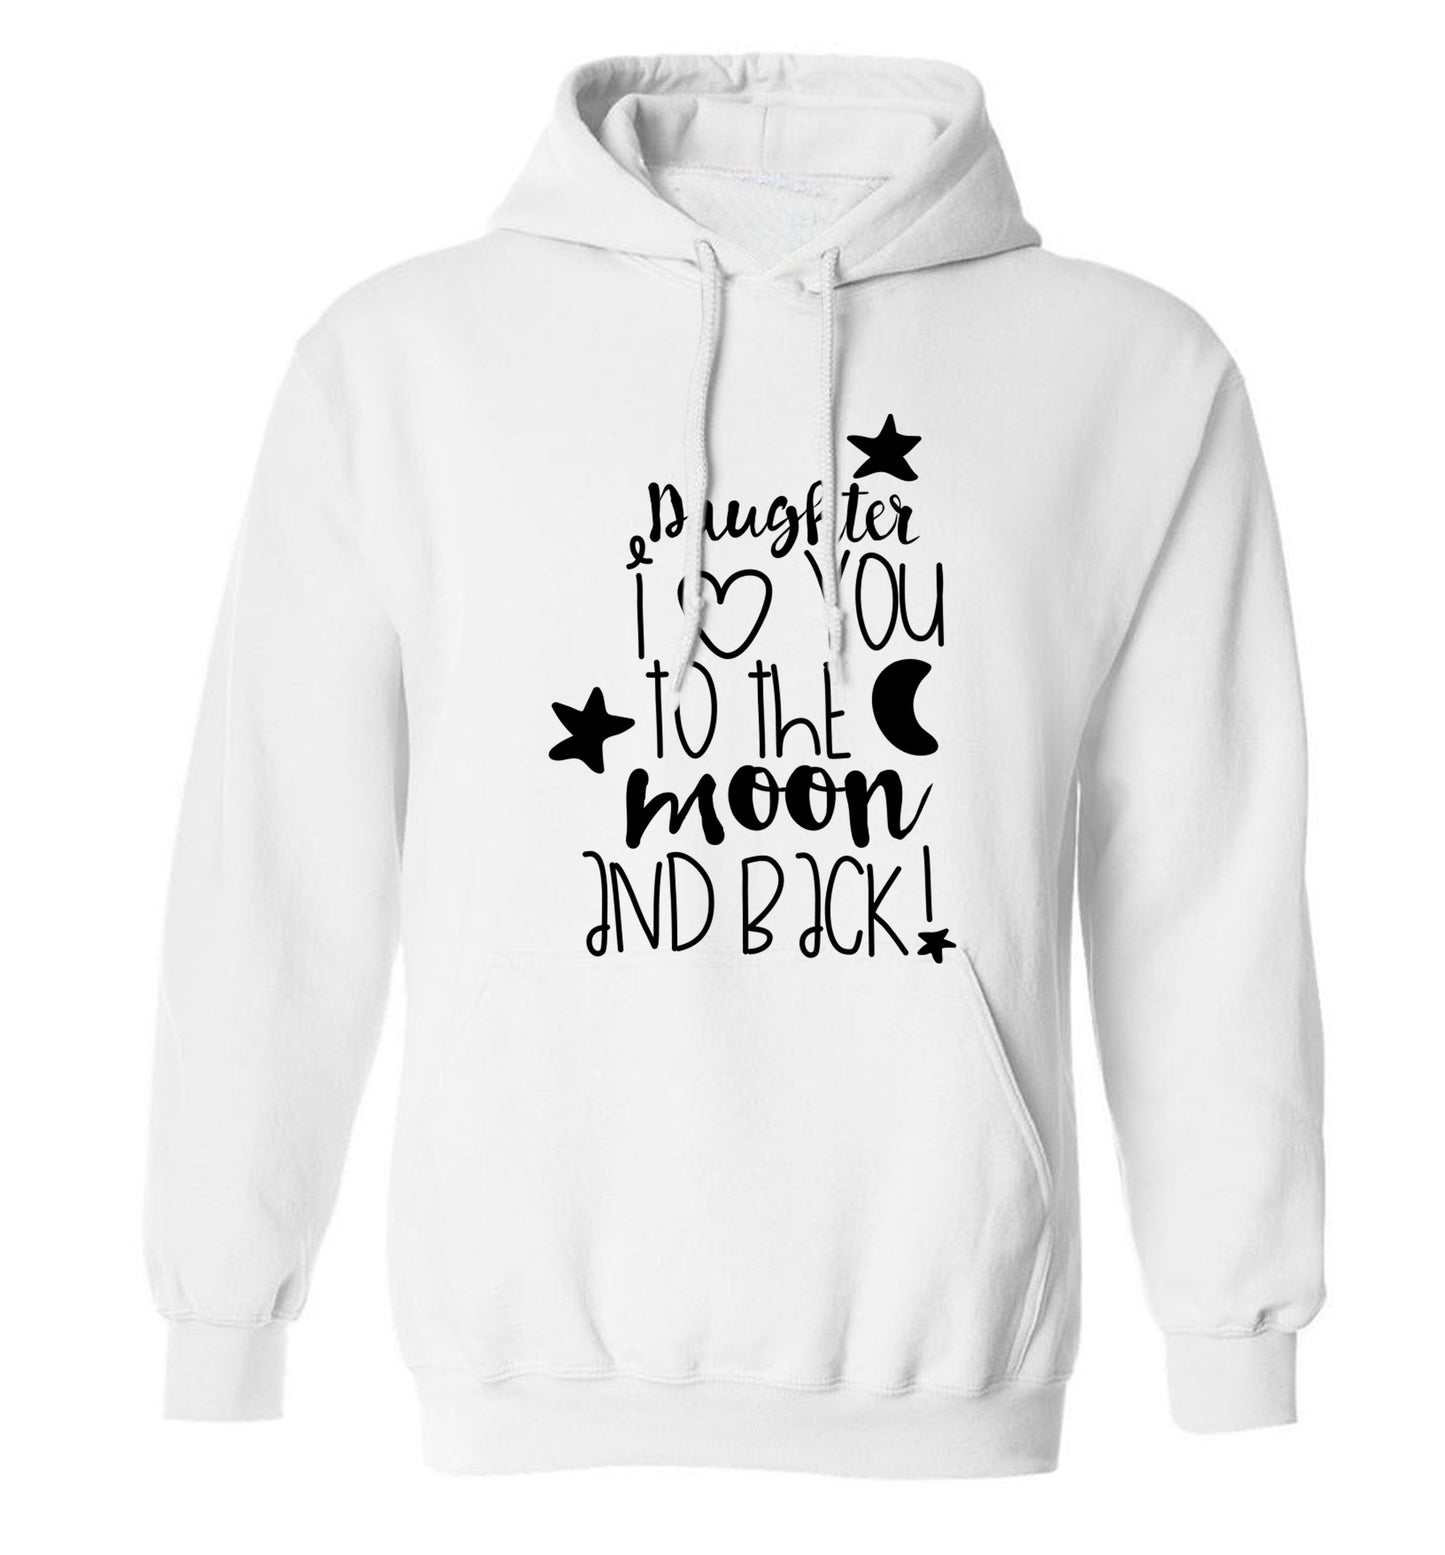 Daughter I love you to the moon and back adults unisex white hoodie 2XL